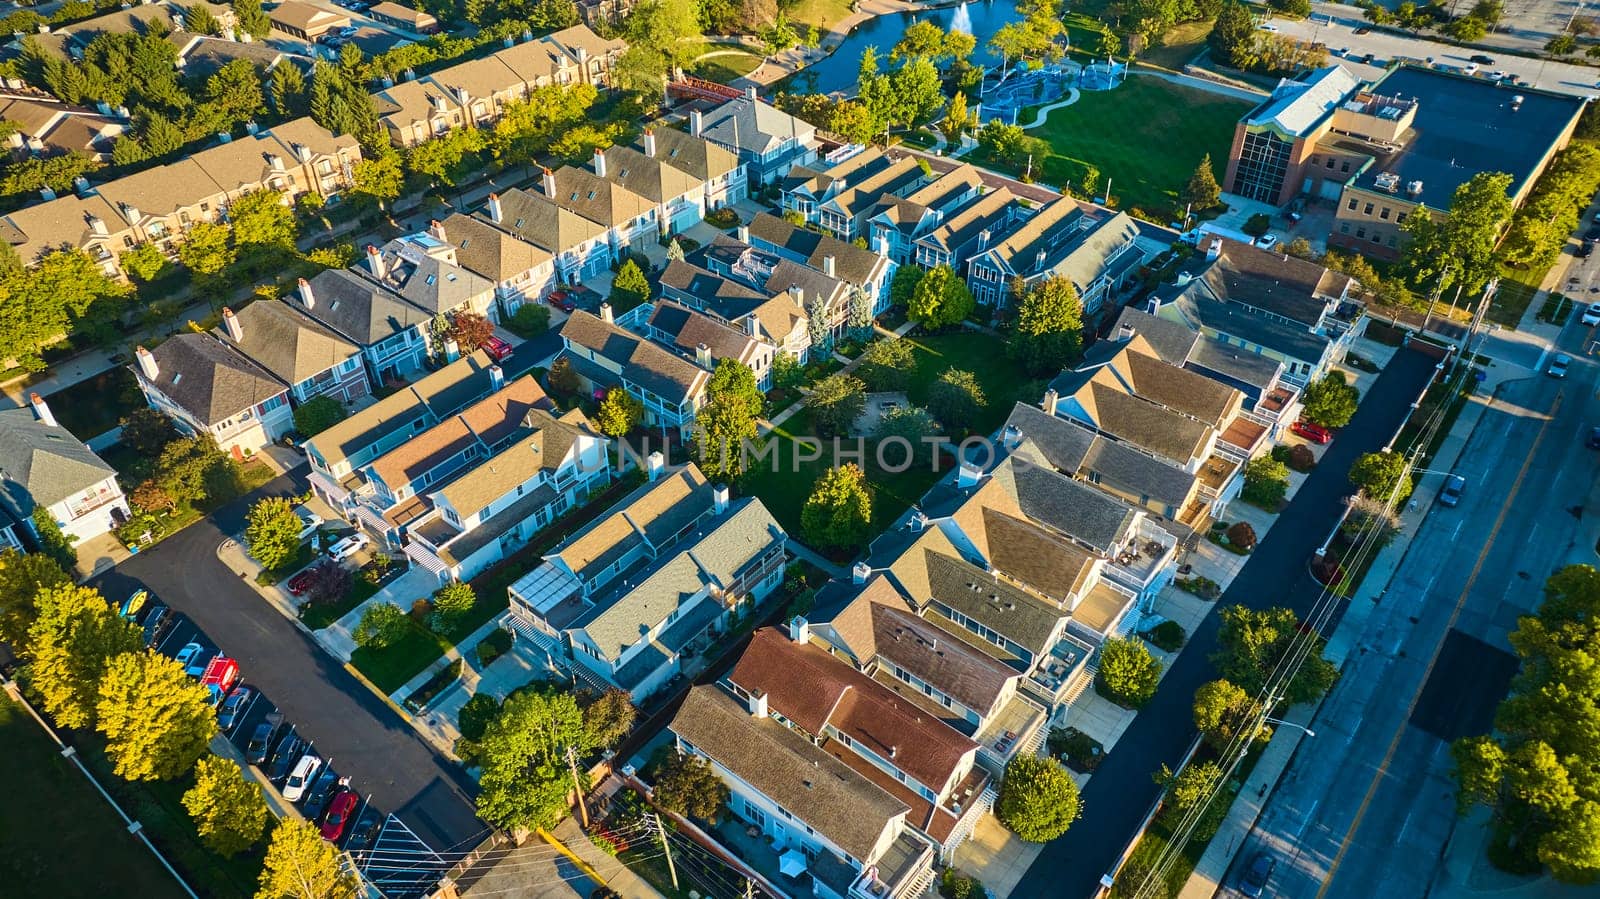 Sunset Over Suburbia - Aerial View of a Tranquil Indianapolis Neighborhood at Golden Hour